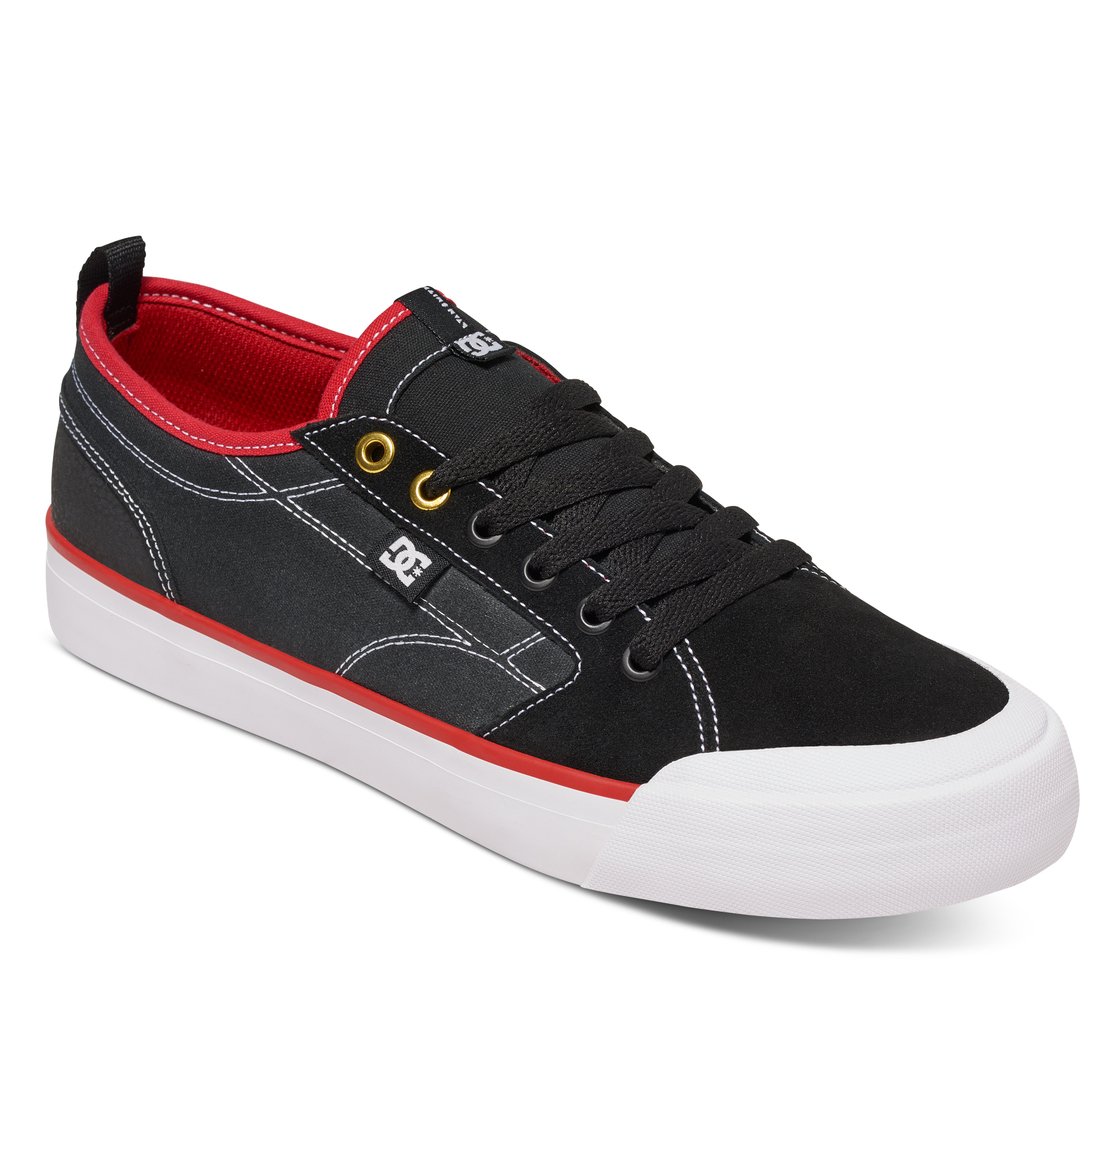 Evan Smith - Shoes 888327686165 | DC Shoes